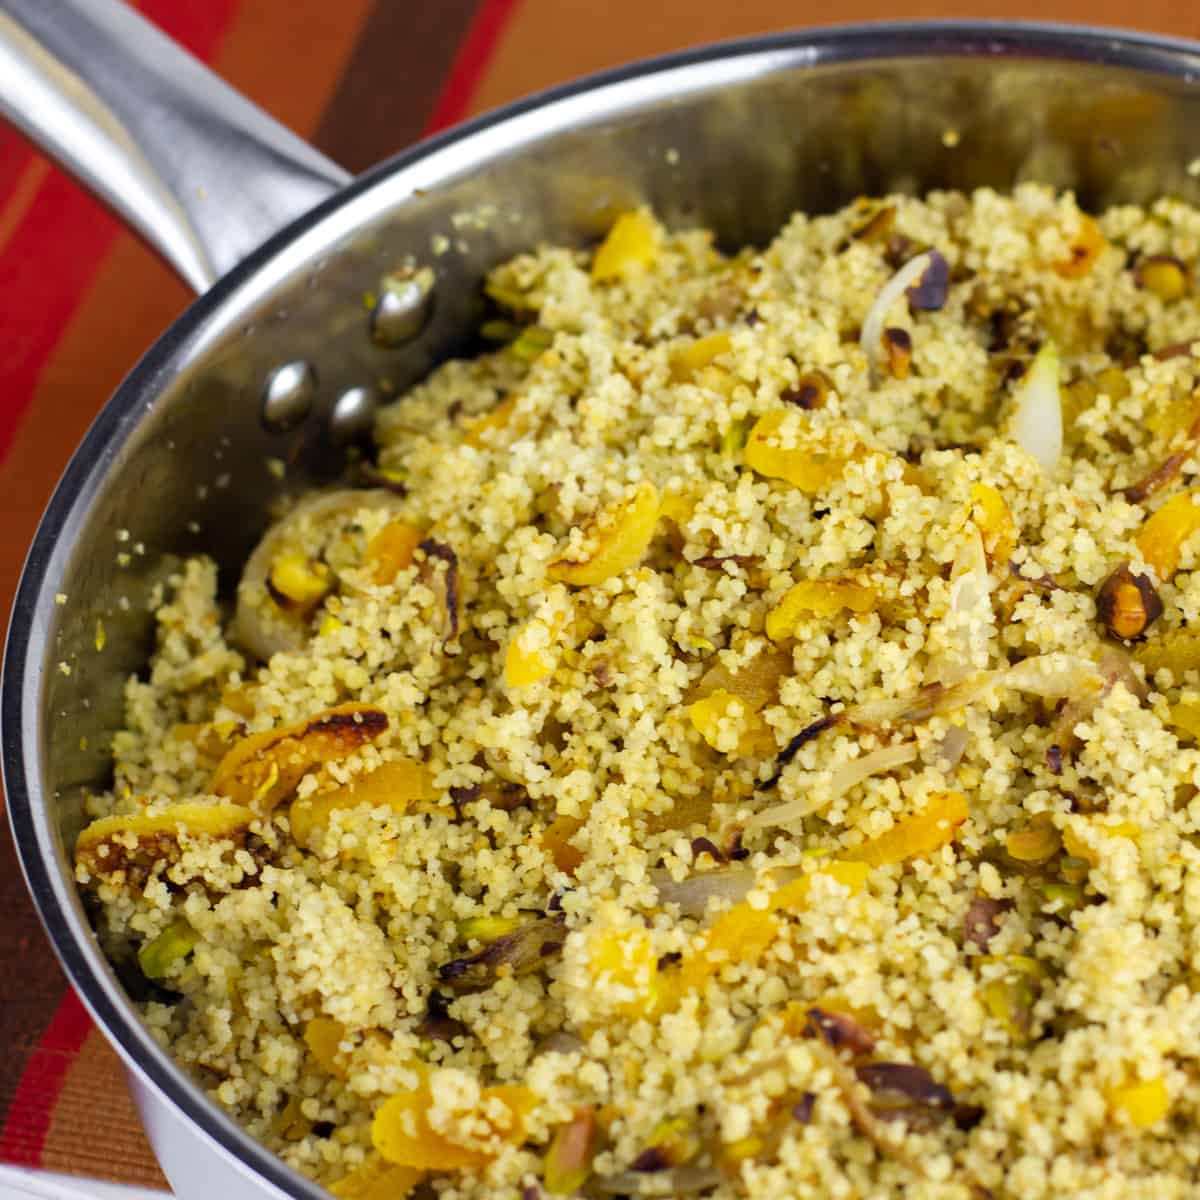 A saucepan with couscous and apricots.